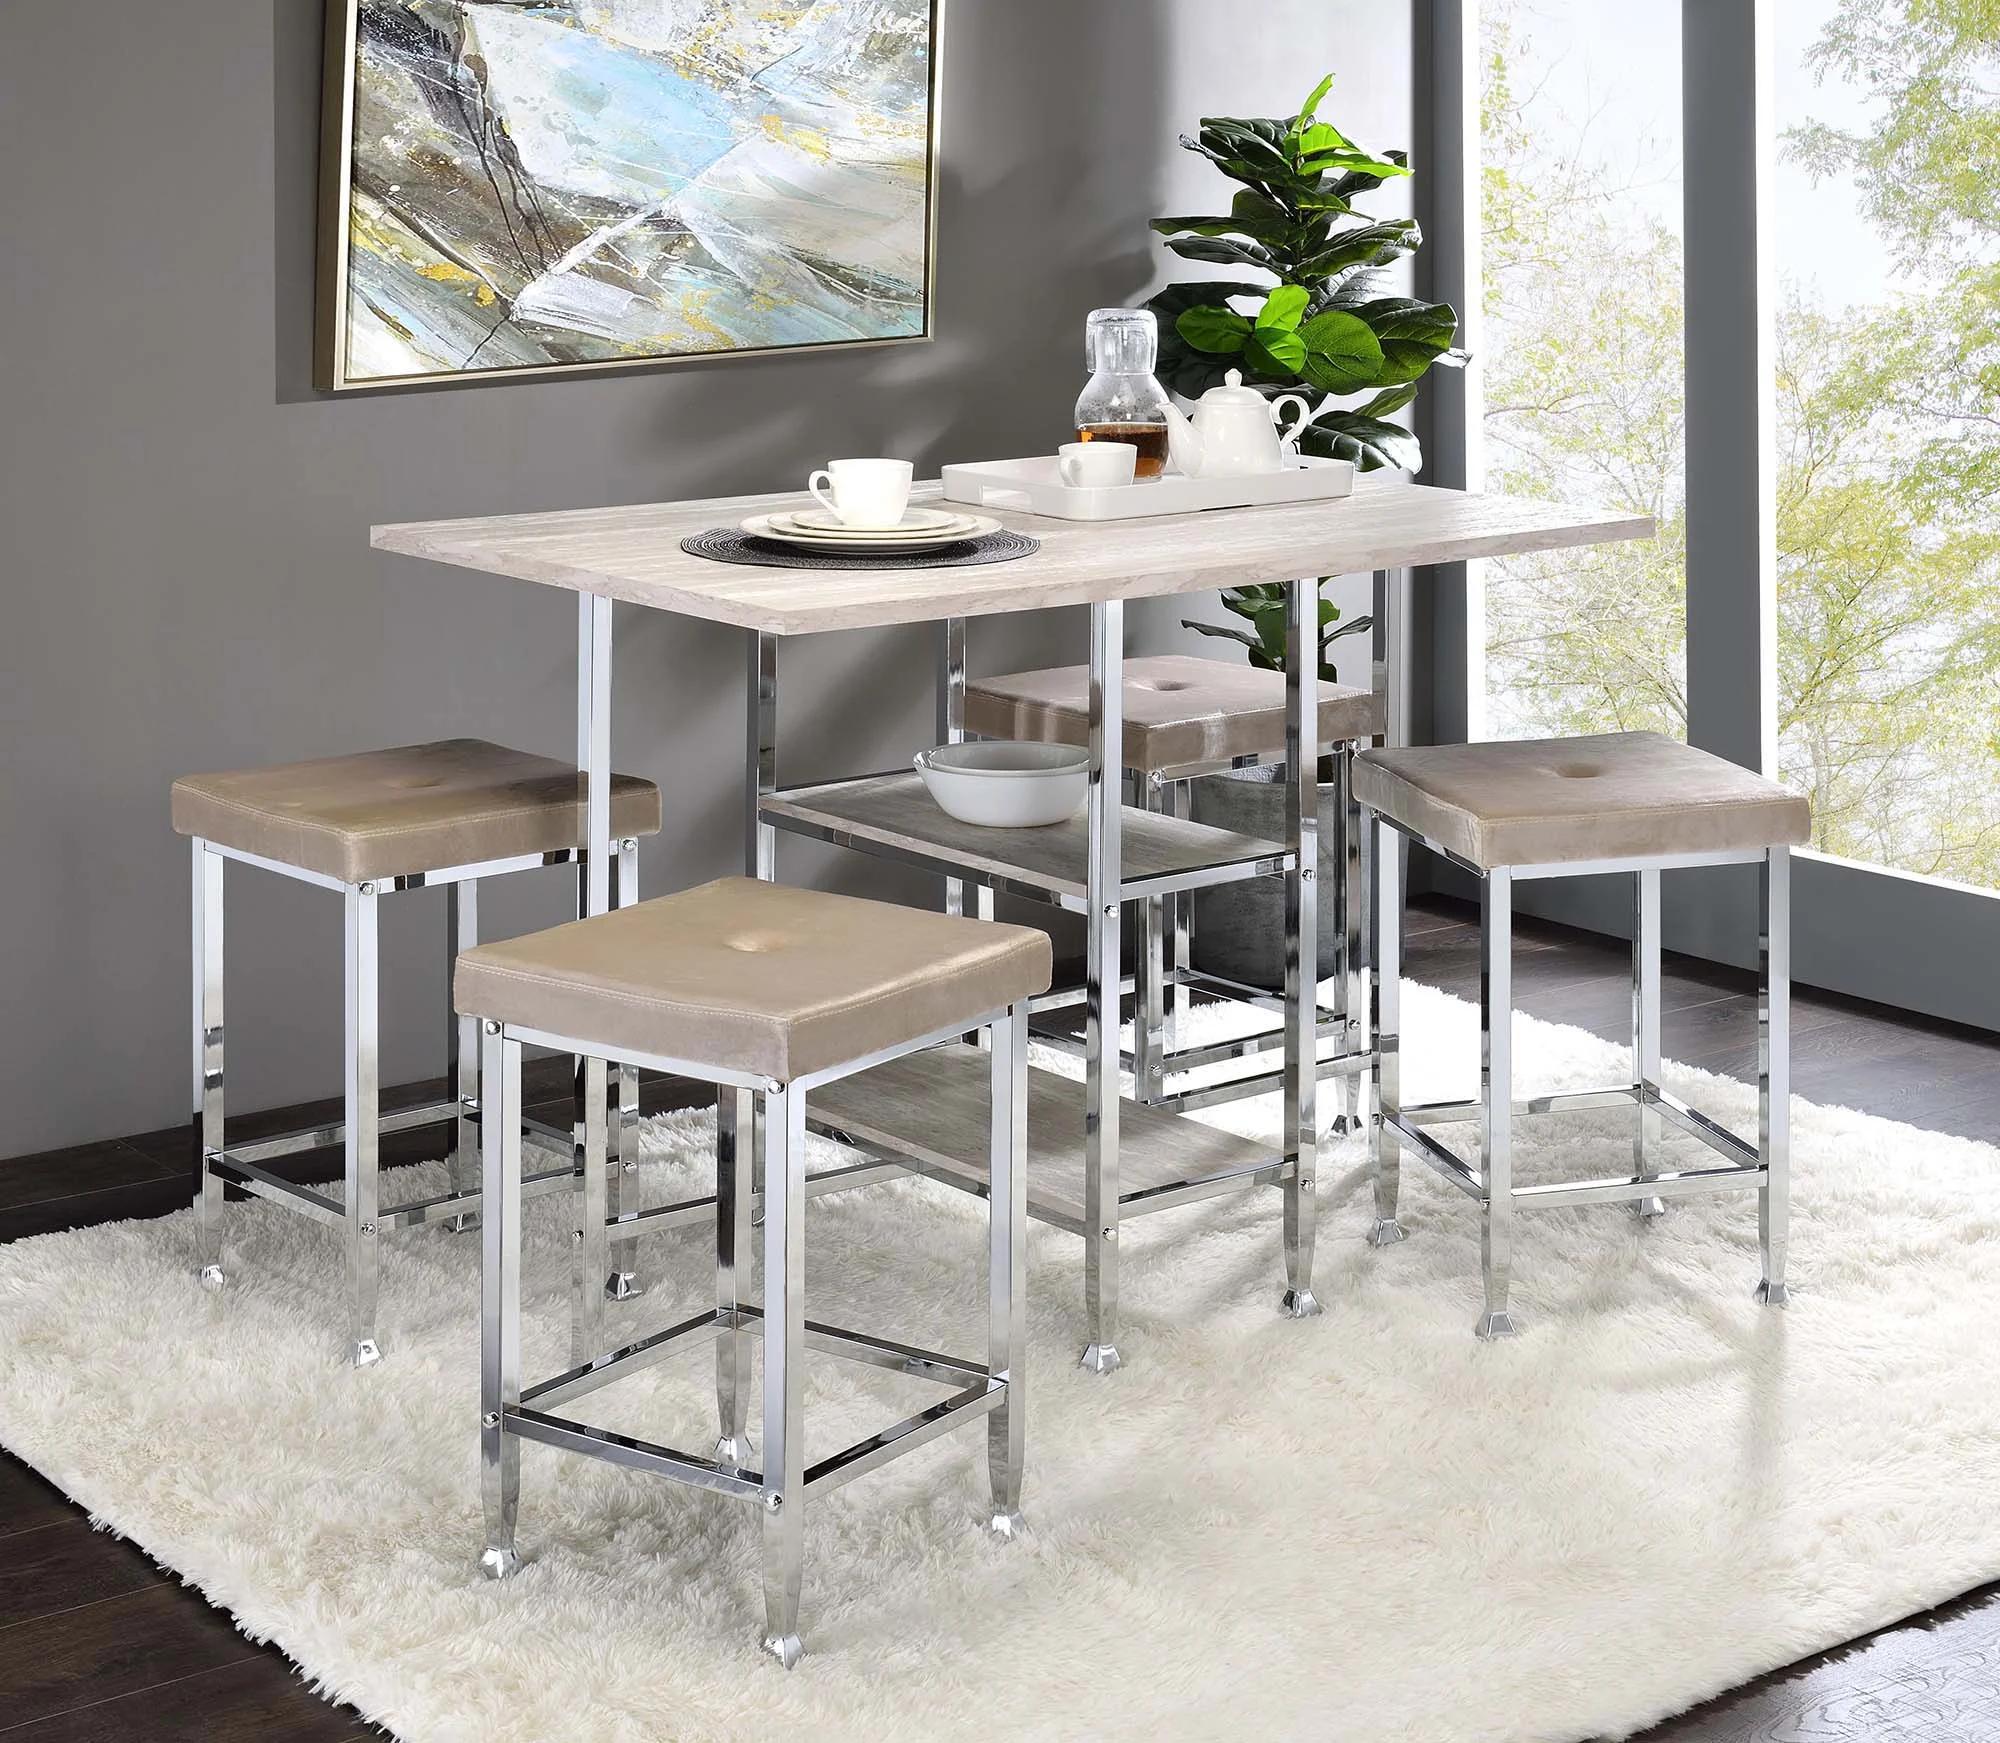 Modern Counter Dining Set Raine 74005-5pcs in Antique White 